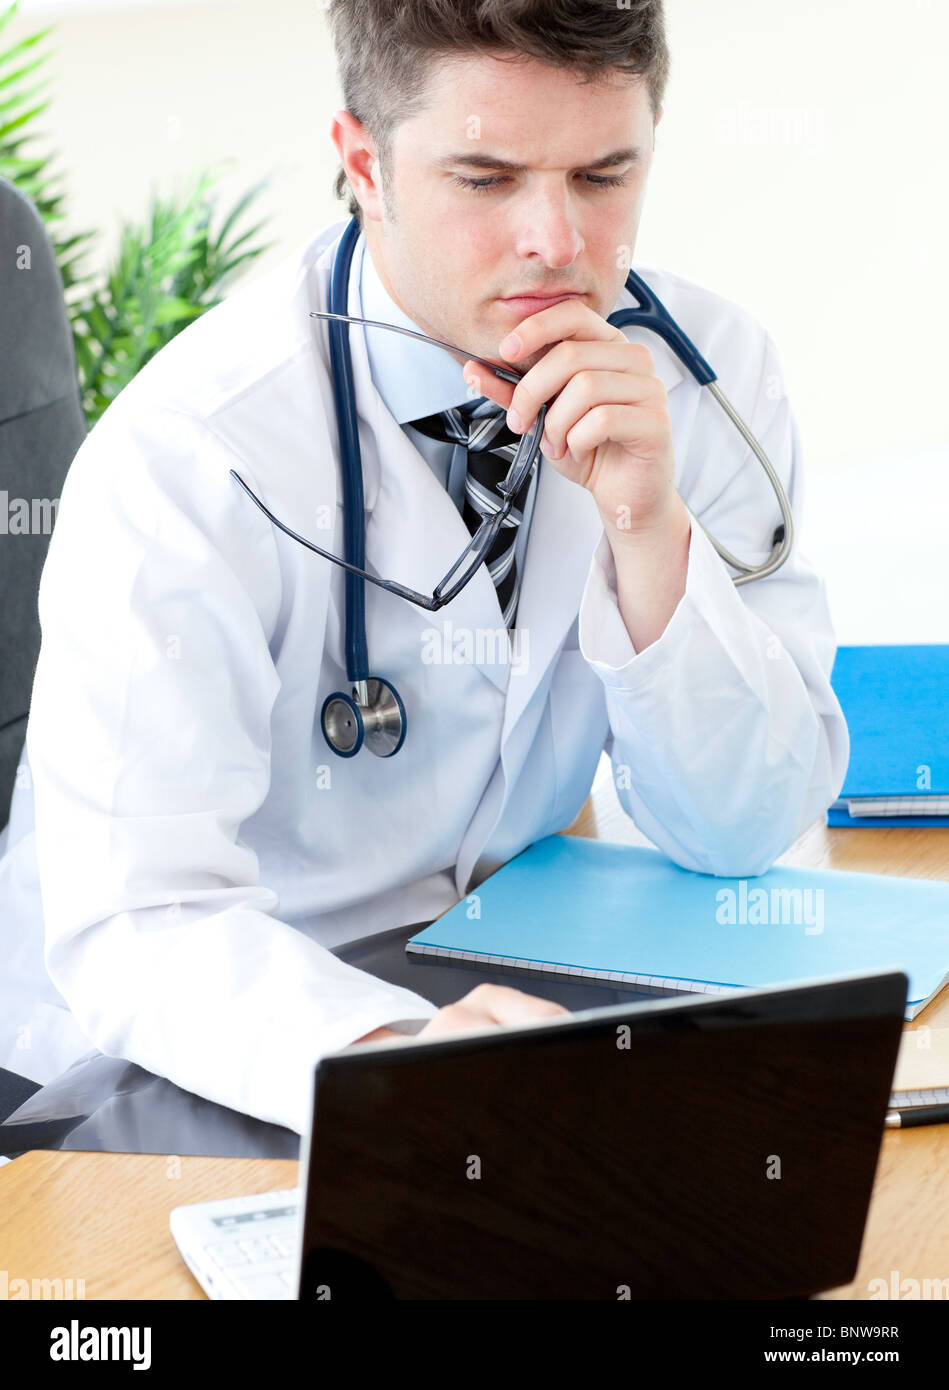 Worried male doctor using a laptop Stock Photo